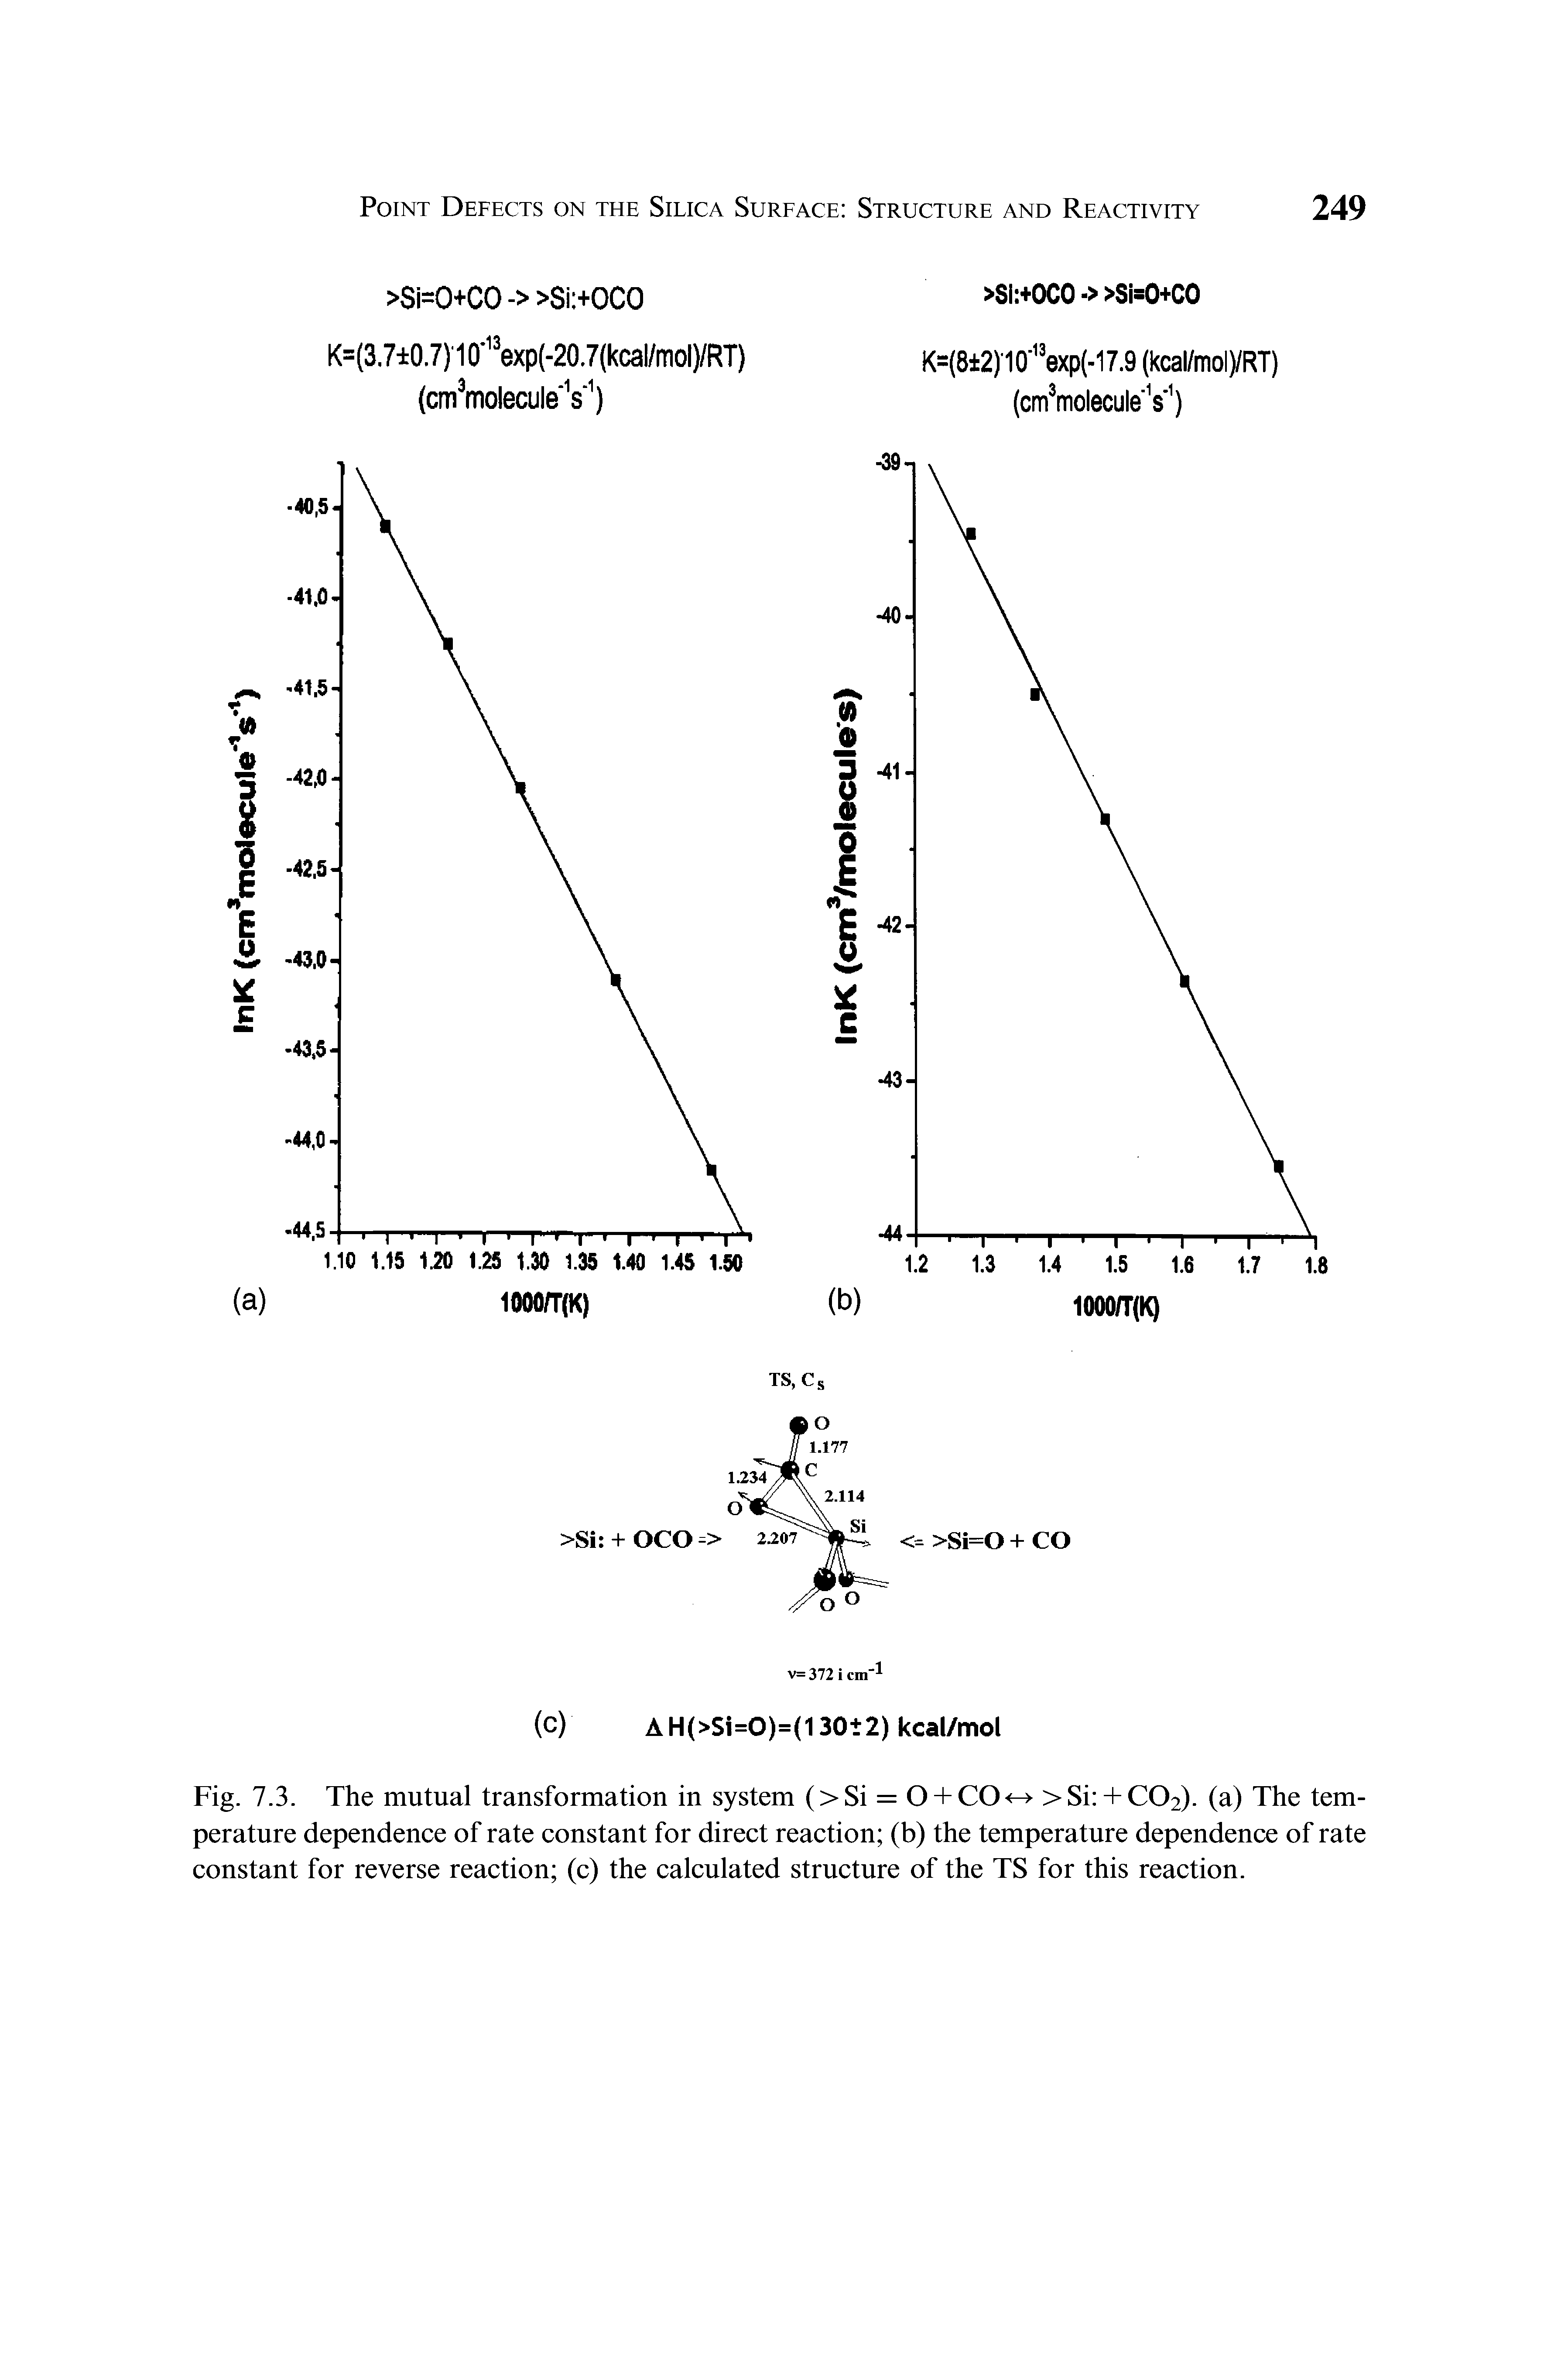 Fig. 7.3. The mutual transformation in system (>Si = 0 + C0<-> >Si + C02). (a) The temperature dependence of rate constant for direct reaction (b) the temperature dependence of rate constant for reverse reaction (c) the calculated structure of the TS for this reaction.